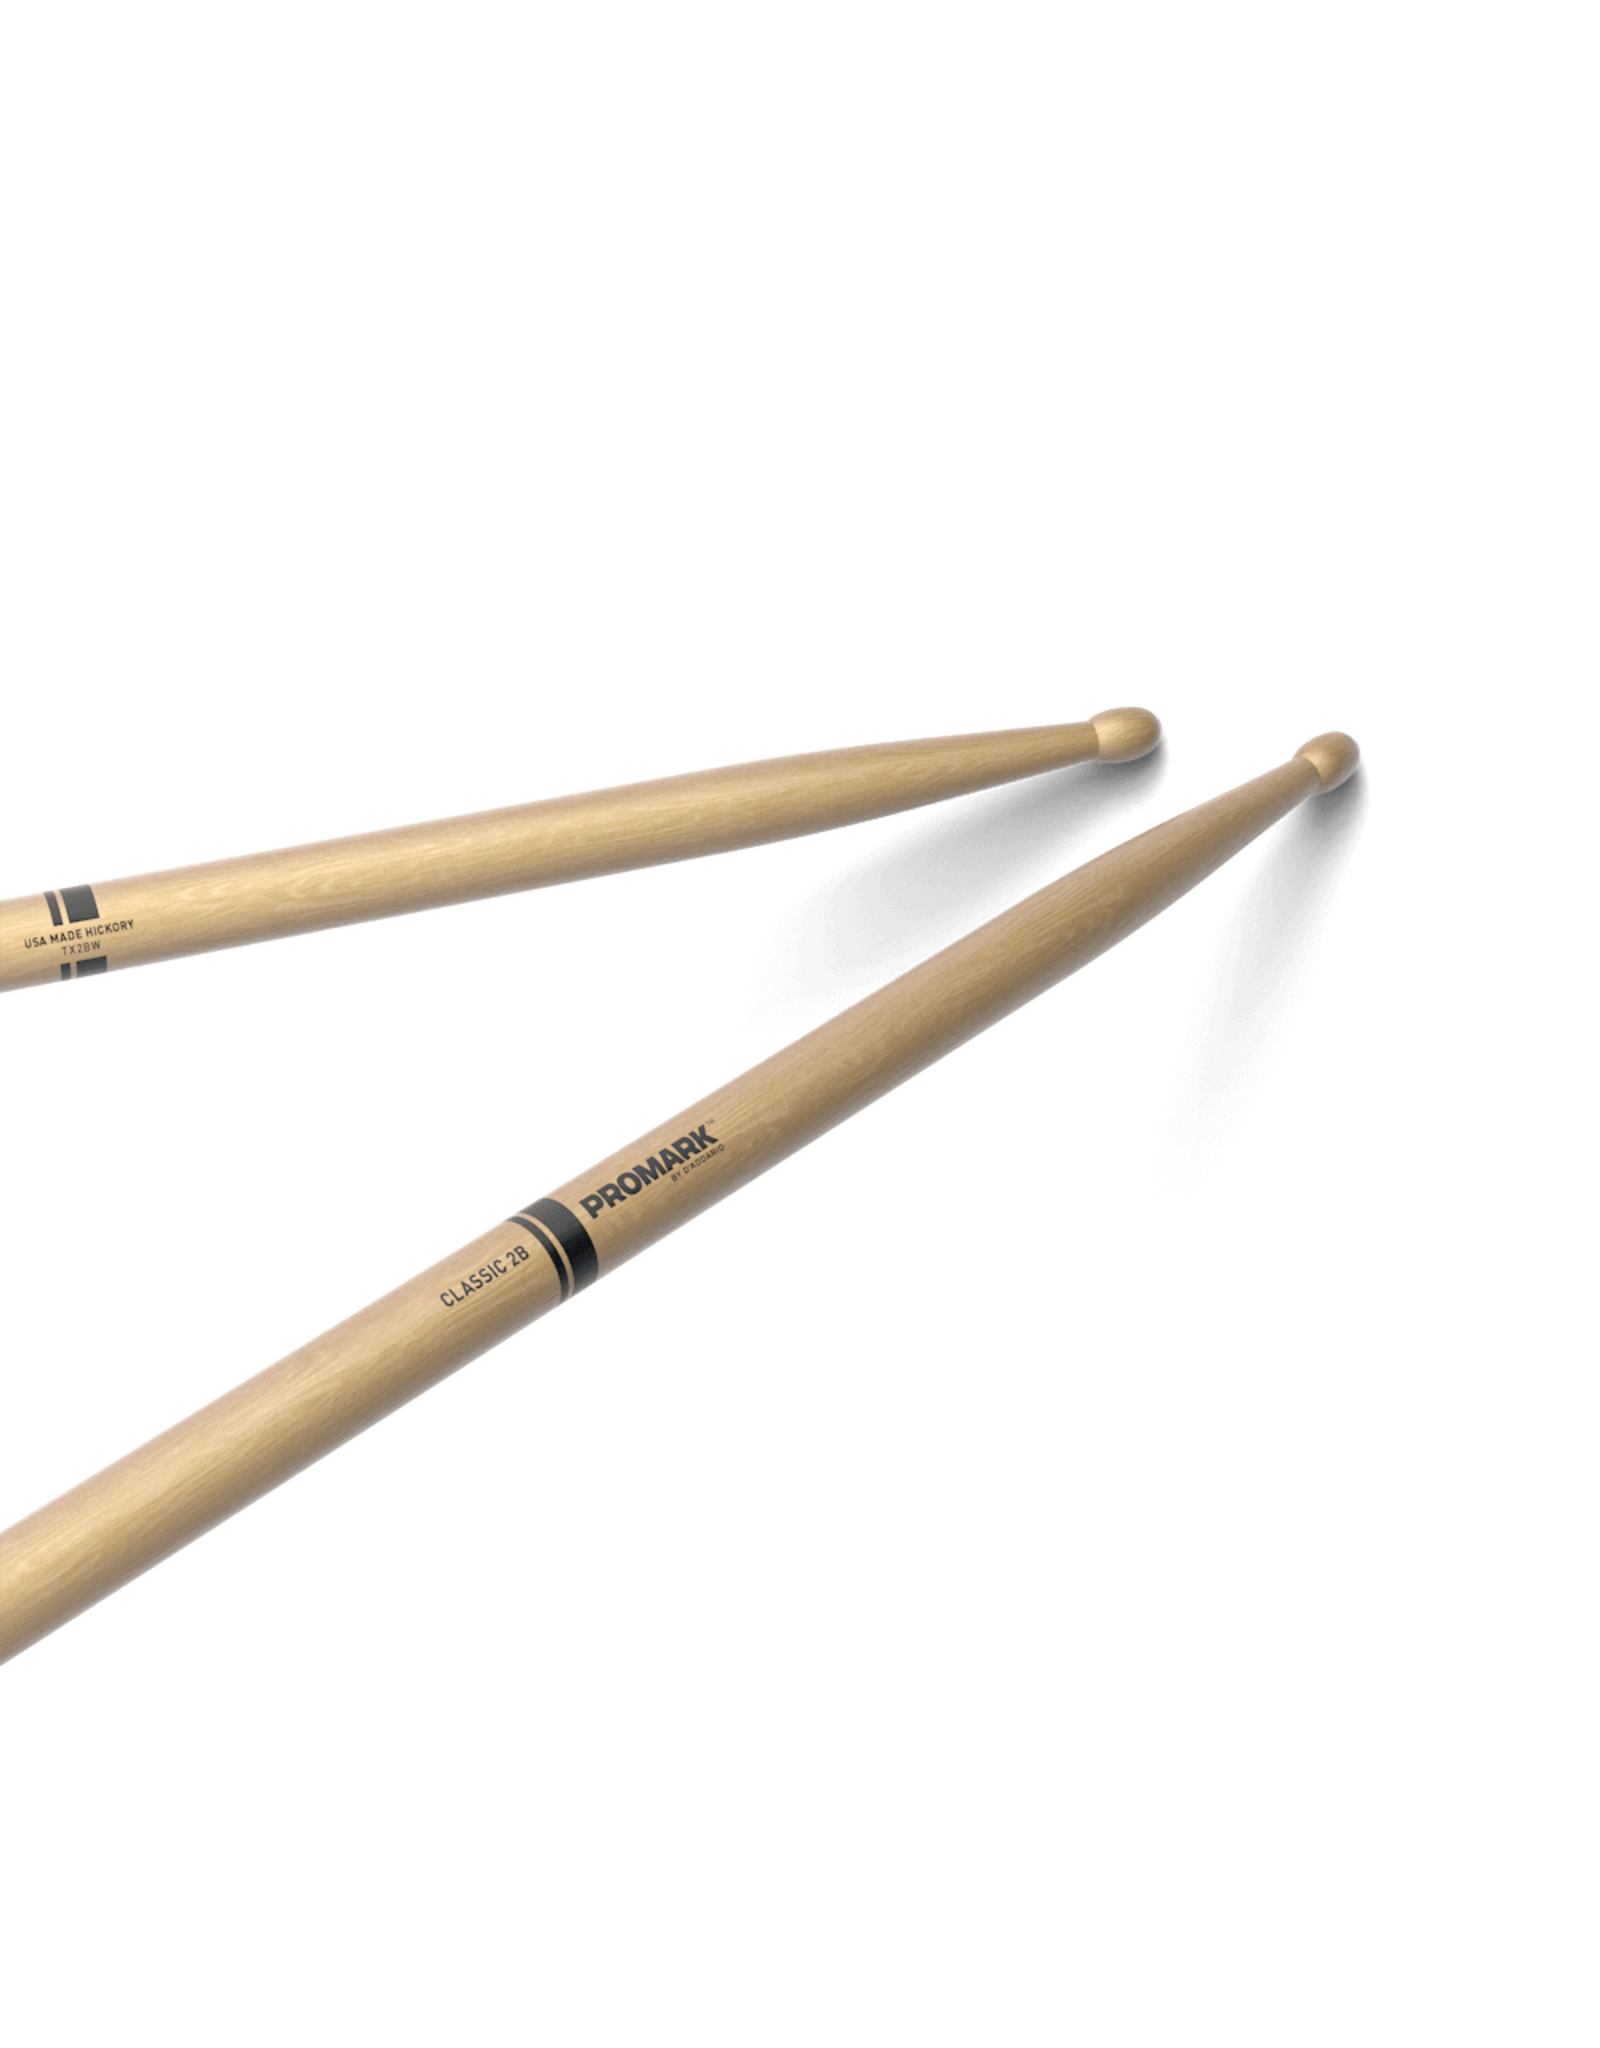 Promark Promark Classic Forward 2B Hickory Wood Tip Drumstick